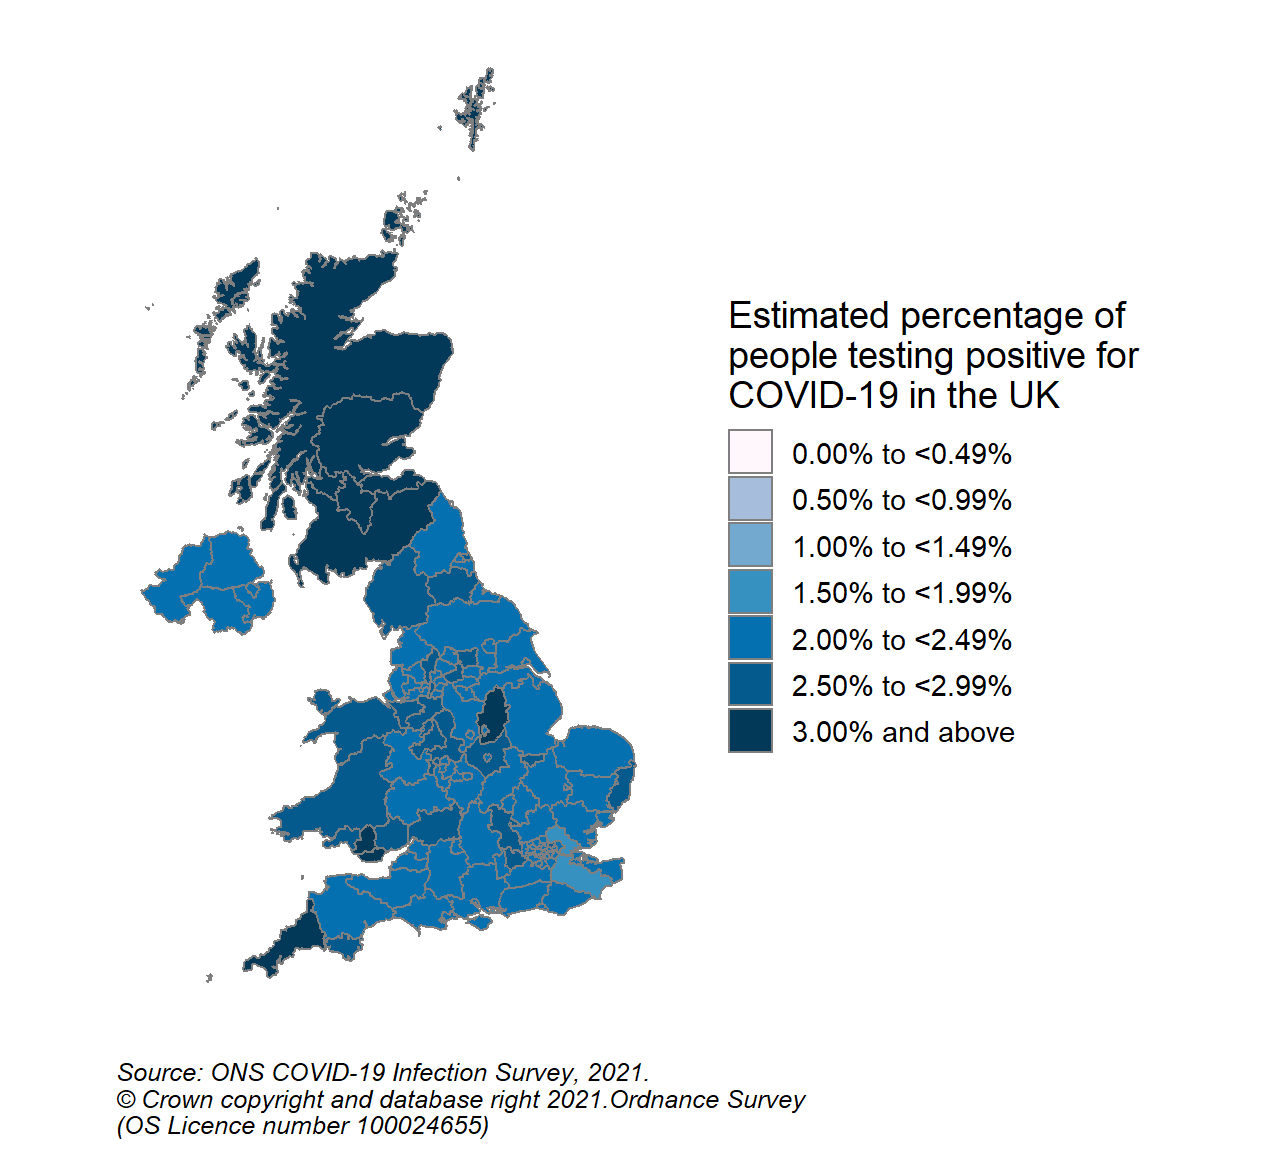 This colour coded map of the UK shows the modelled estimates of the percentage of the private residential population testing positive for COVID-19, by COVID-19 Infection Survey sub-regions. In Scotland, these sub-regions are comprised of Health Boards. The regions are: 123 - NHS Grampian, NHS Highland, NHS Orkney, NHS Shetland and NHS Western Isles, 124 - NHS Fife, NHS Forth Valley and NHS Tayside, 125 - NHS Greater Glasgow & Clyde, 126 - NHS Lothian, 127 - NHS Lanarkshire, 128 - NHS Ayrshire & Arran, NHS Borders and NHS Dumfries & Galloway.  In the most recent week (1 to 7 May 2022), estimates for the percentage of people testing positive were similar for all CIS Regions in Scotland and ranged from 3.17% in CIS Region 128 (NHS Ayrshire & Arran, NHS Borders and NHS Dumfries & Galloway) (95% credible interval: 2.65% to 3.81%) to 3.25% in CIS Region 127 (NHS Lanarkshire) (95% credible interval: 2.65% to 3.89%).